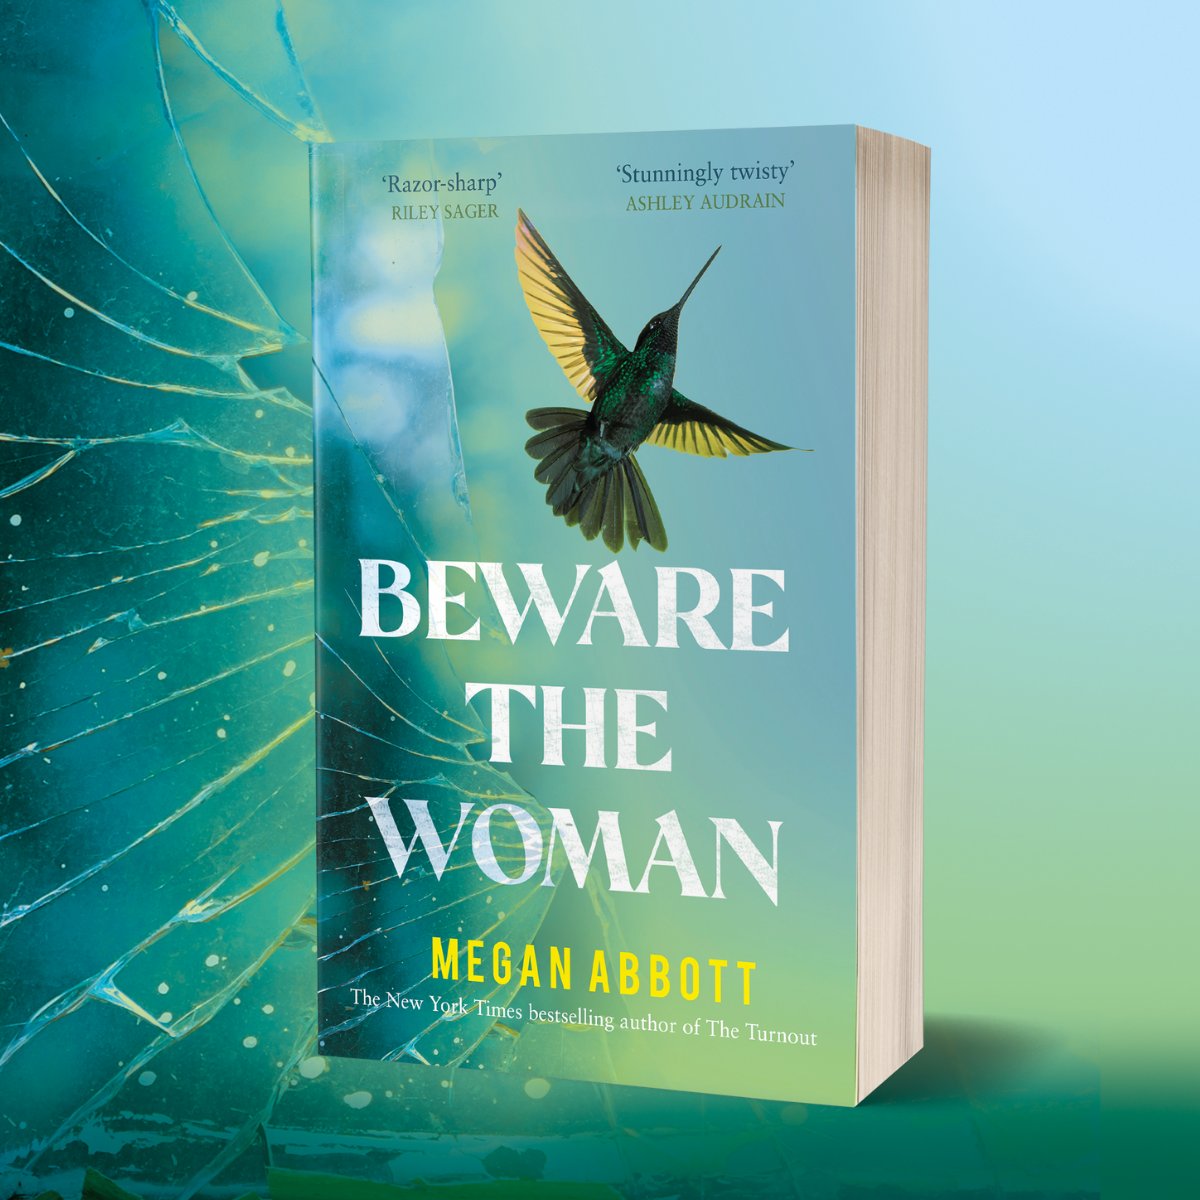 ⚡'Splendidly tense and atmospheric' Mail on Sunday ⚡ Out today from New York Times bestselling and award-winning author @MeganeAbbott, Beware the Woman is a chilling and compulsive novel about a family holiday that takes a terrifying turn. Read now: brnw.ch/21wJwSL